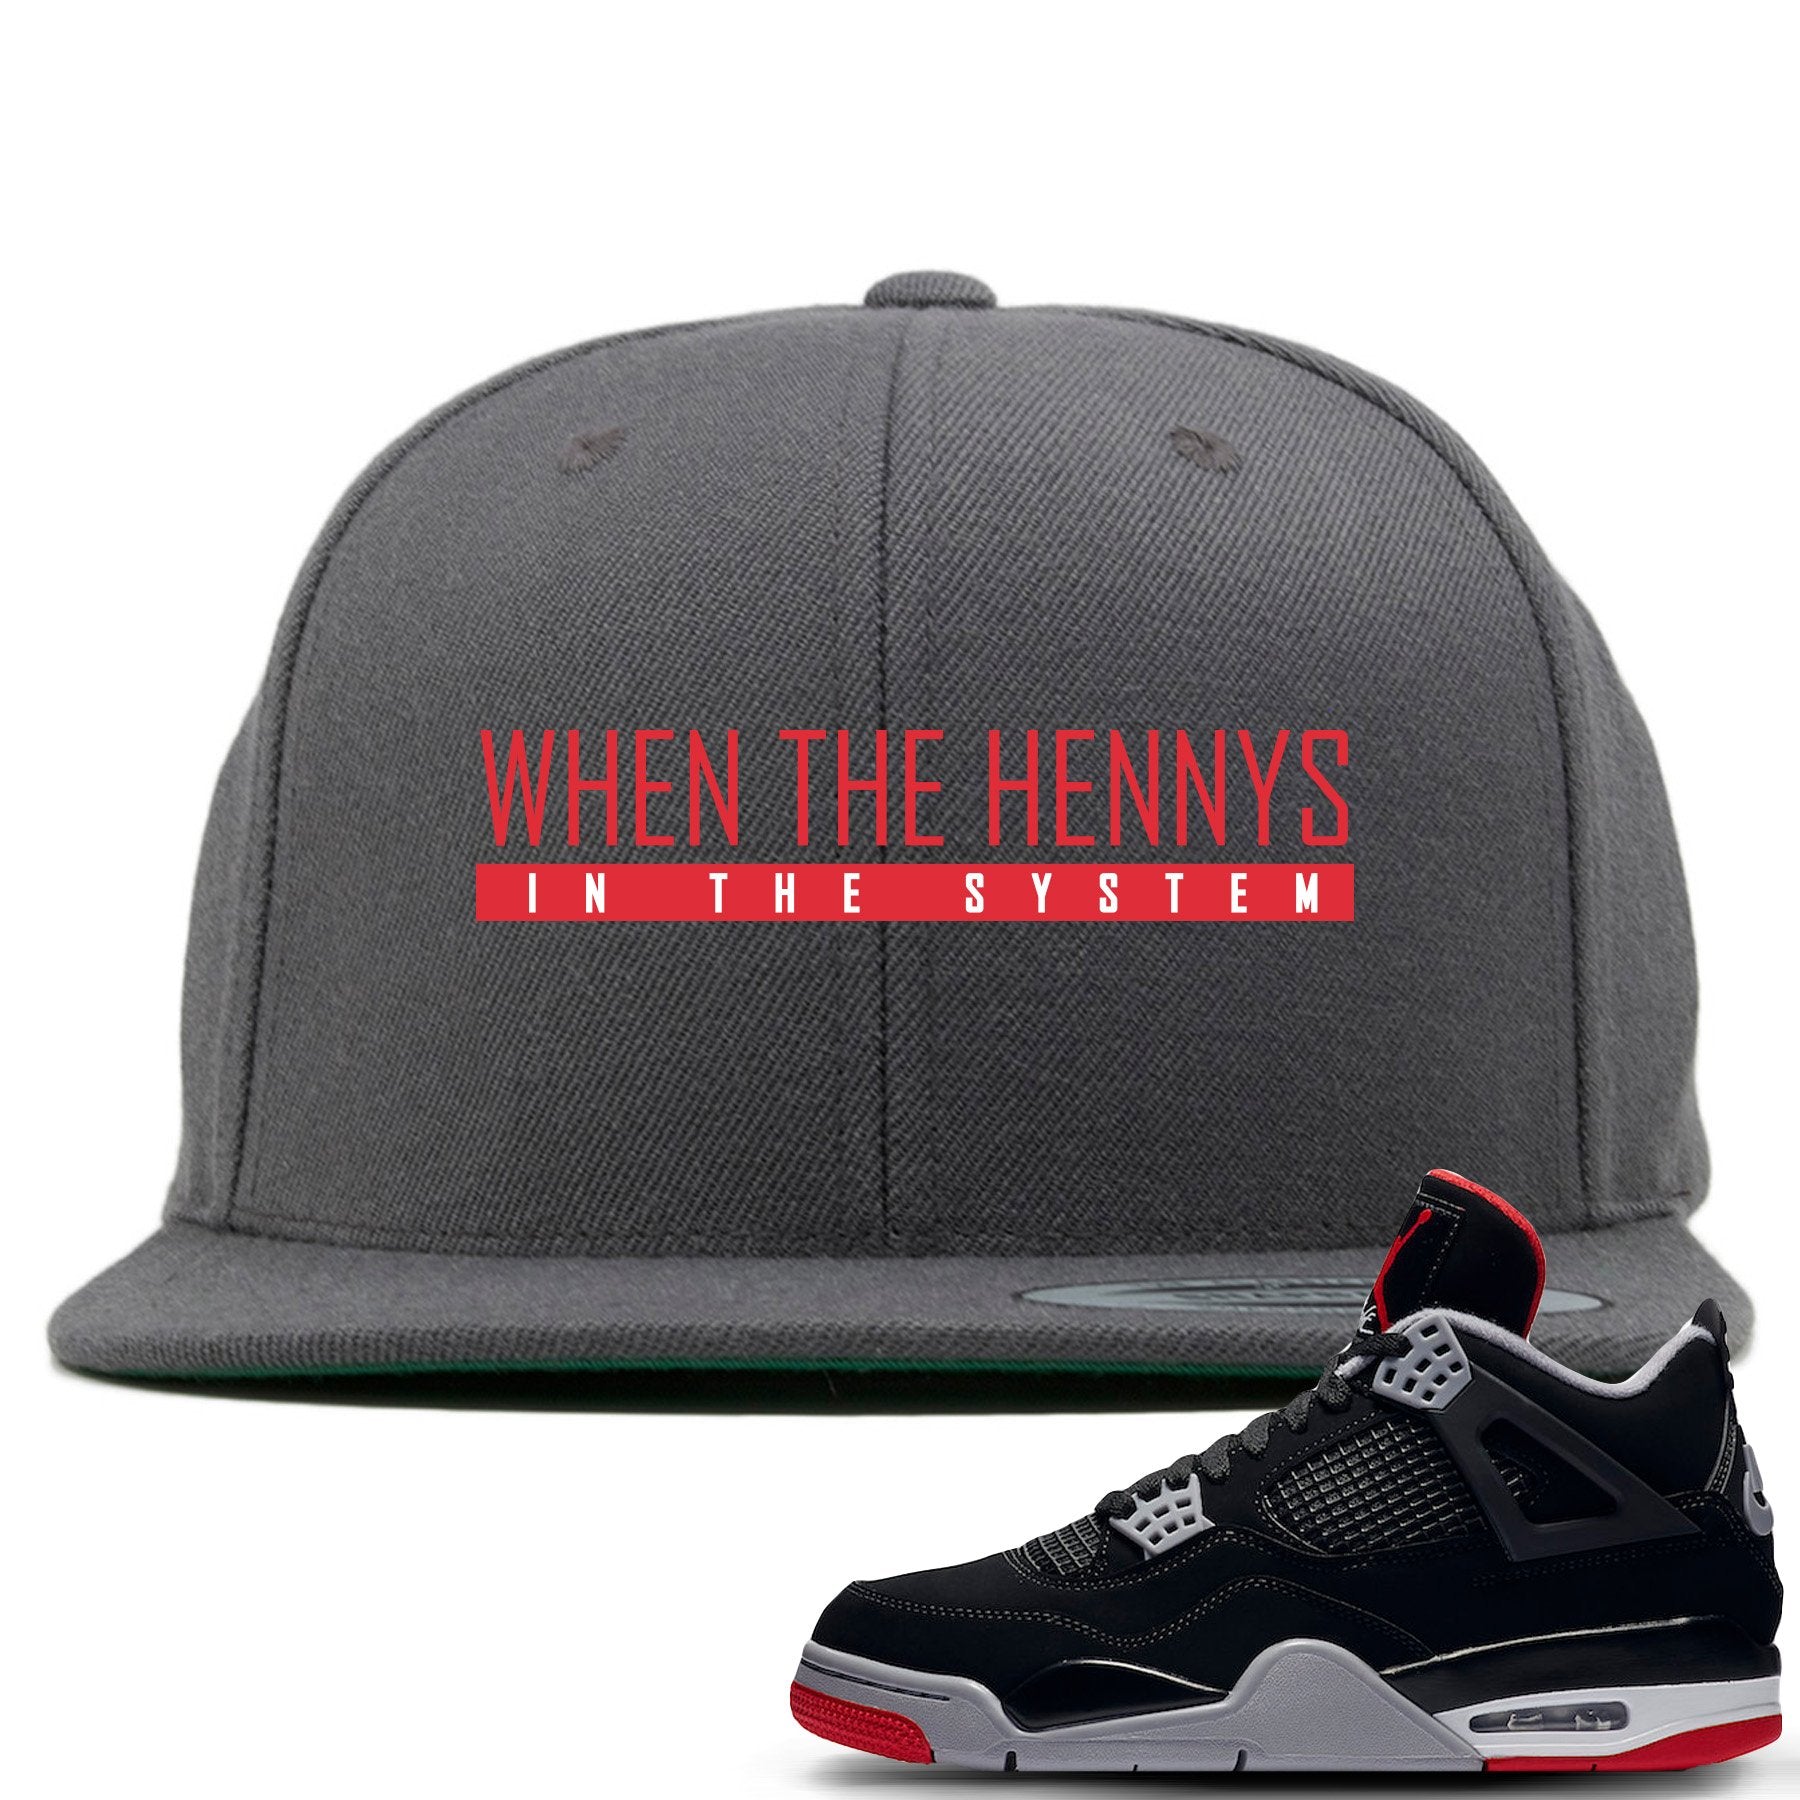 This grey and red snapback will match great with your Air Jordan 4 Bred shoes